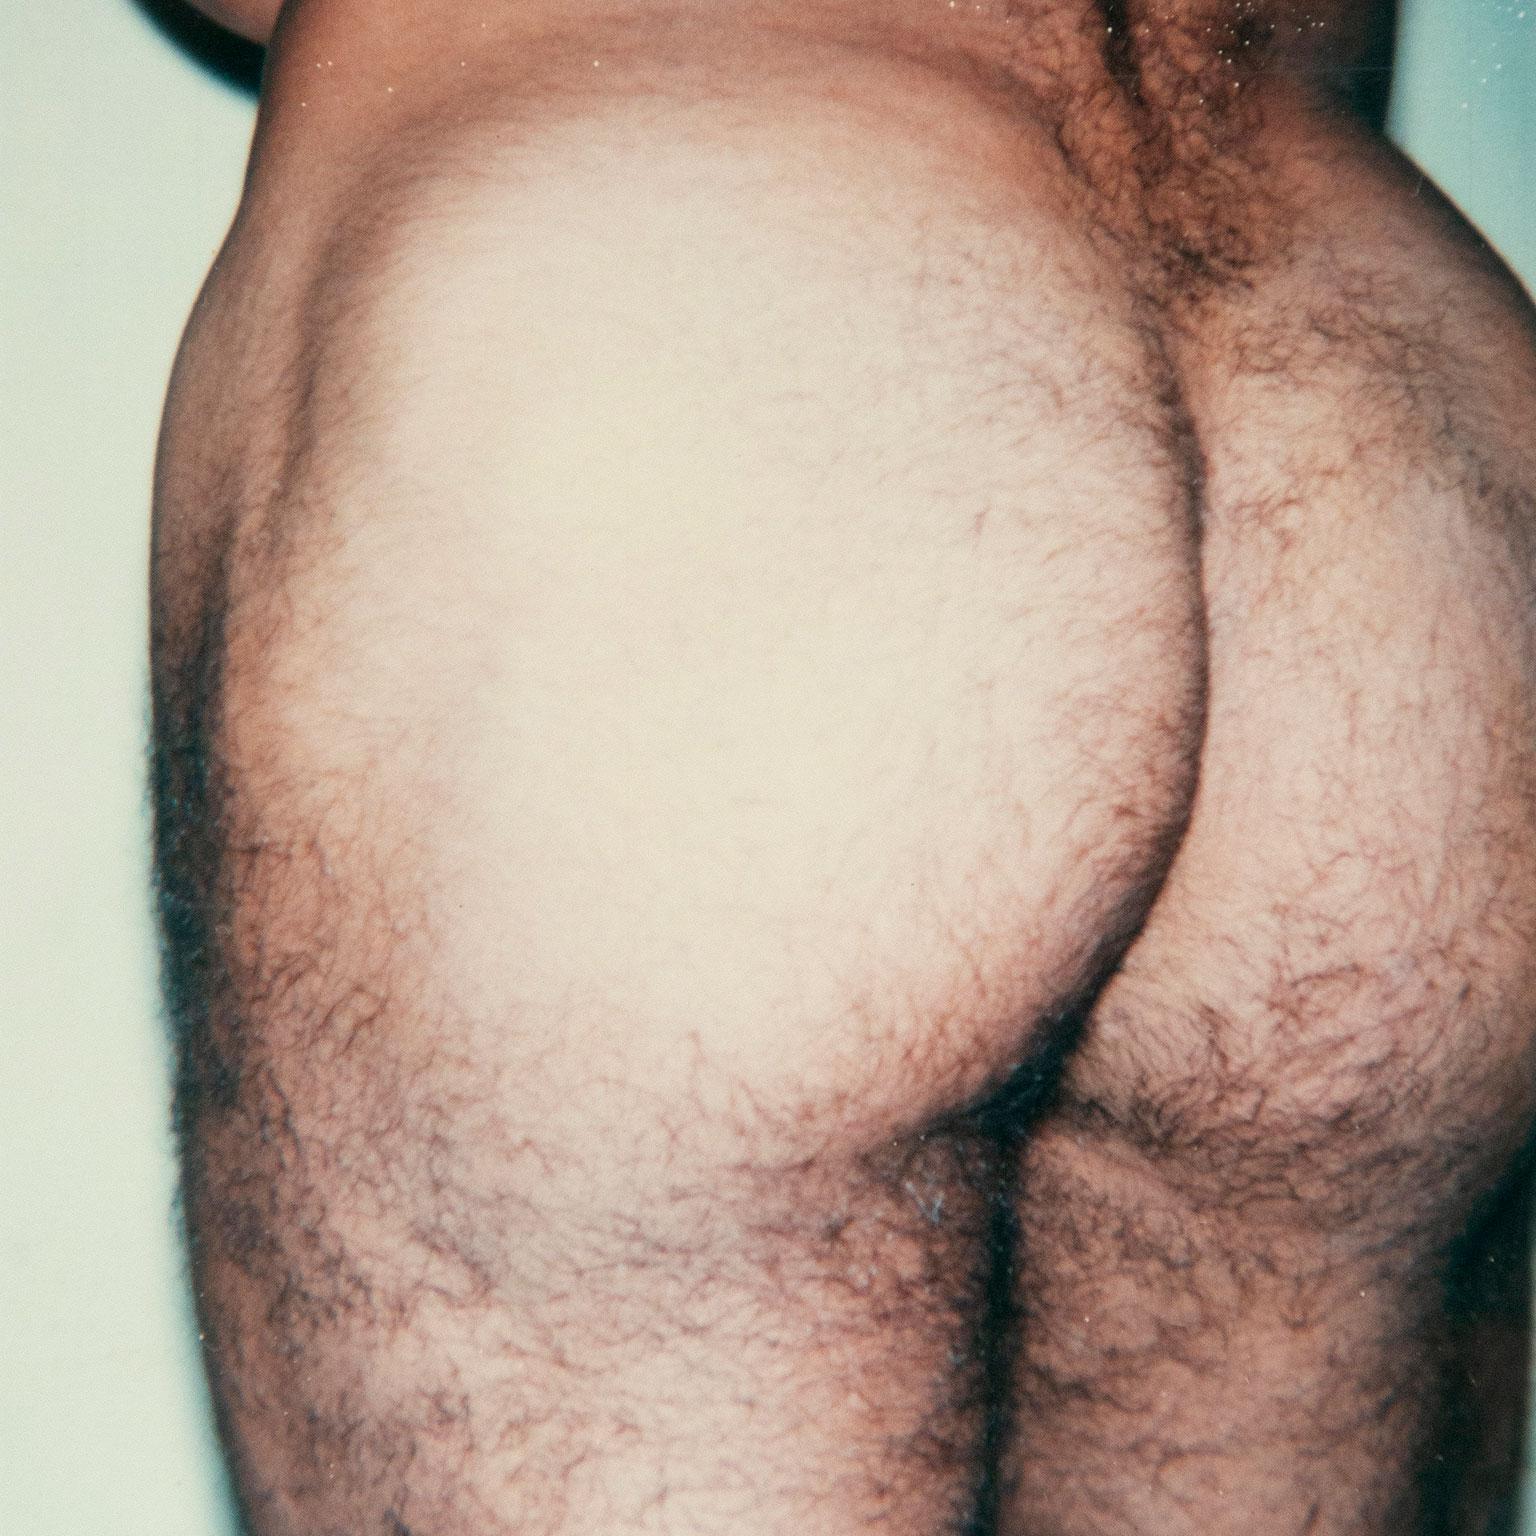 Butt - H - American Modern Photograph by Andy Warhol